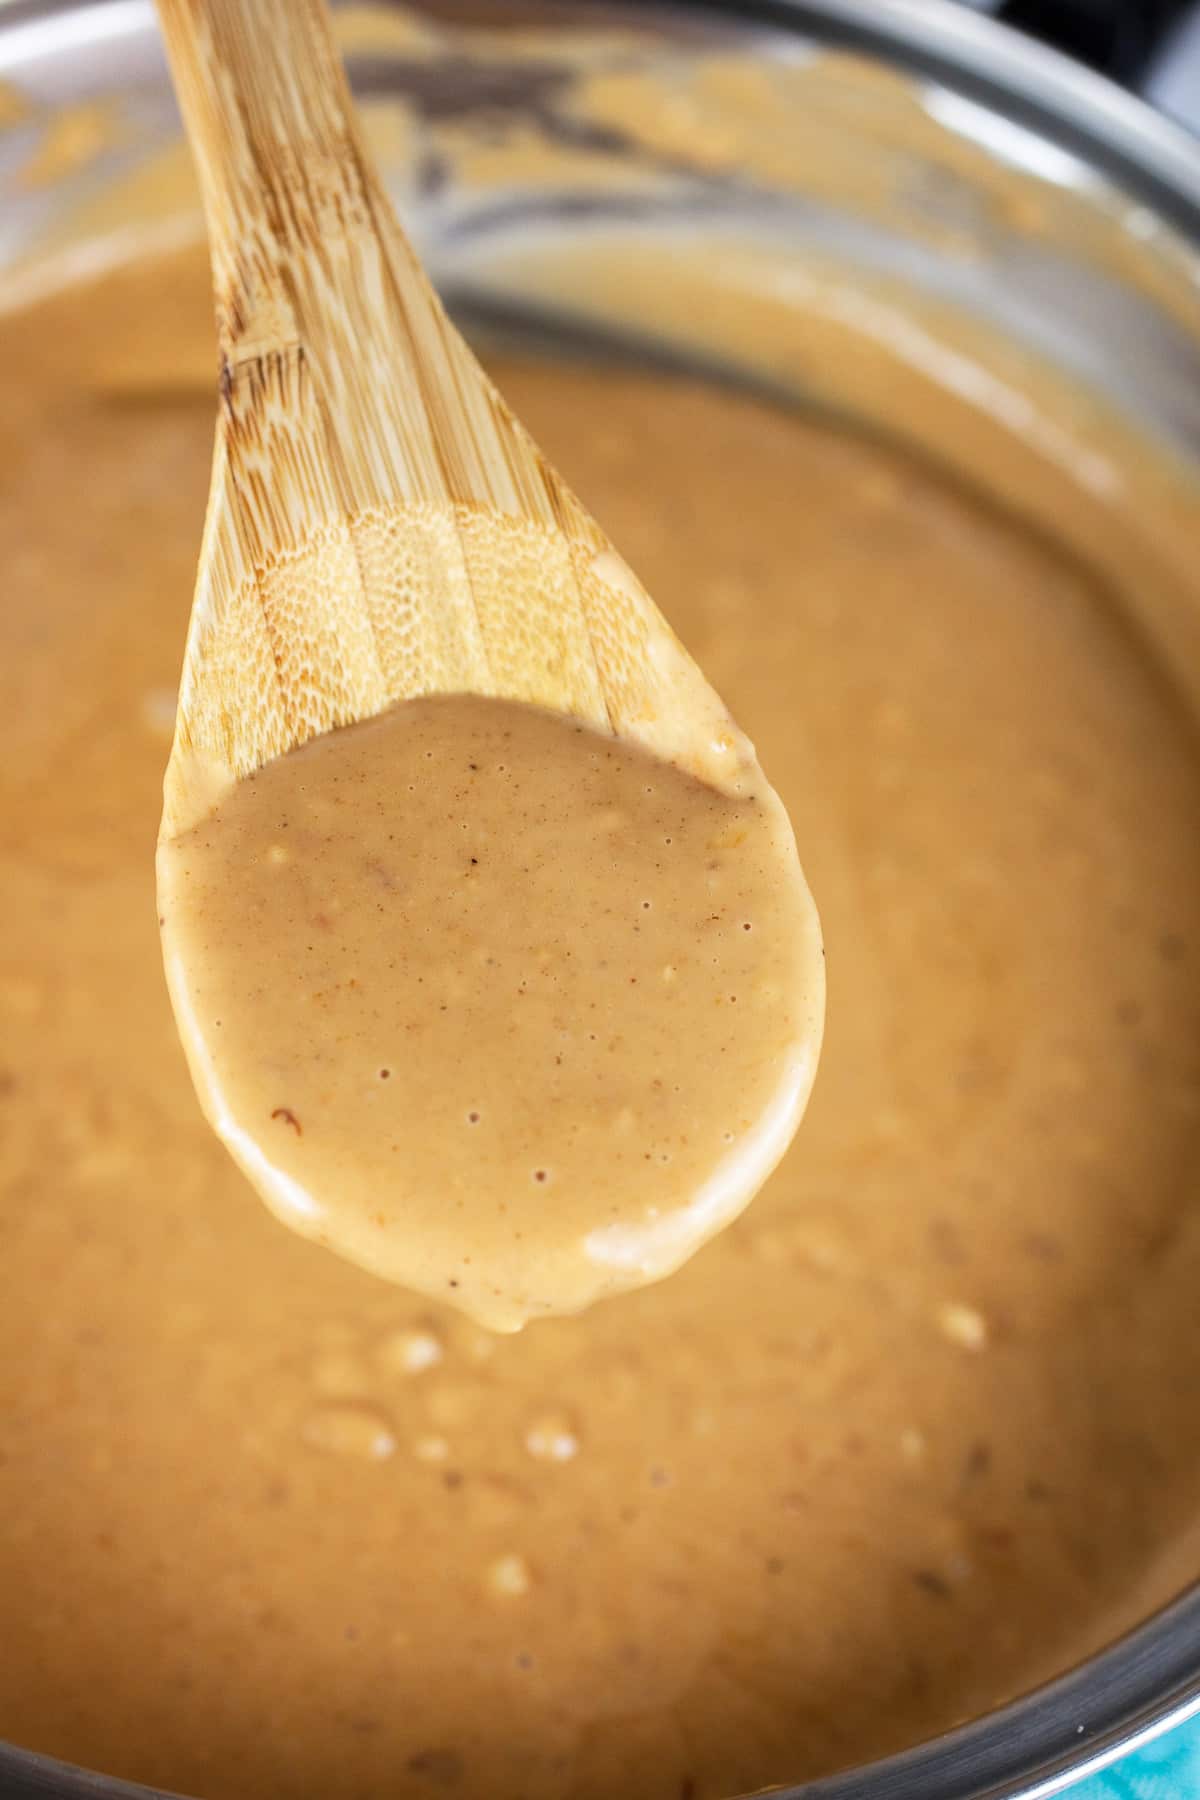 Wooden spoonful of peanut sauce lifted from skillet.